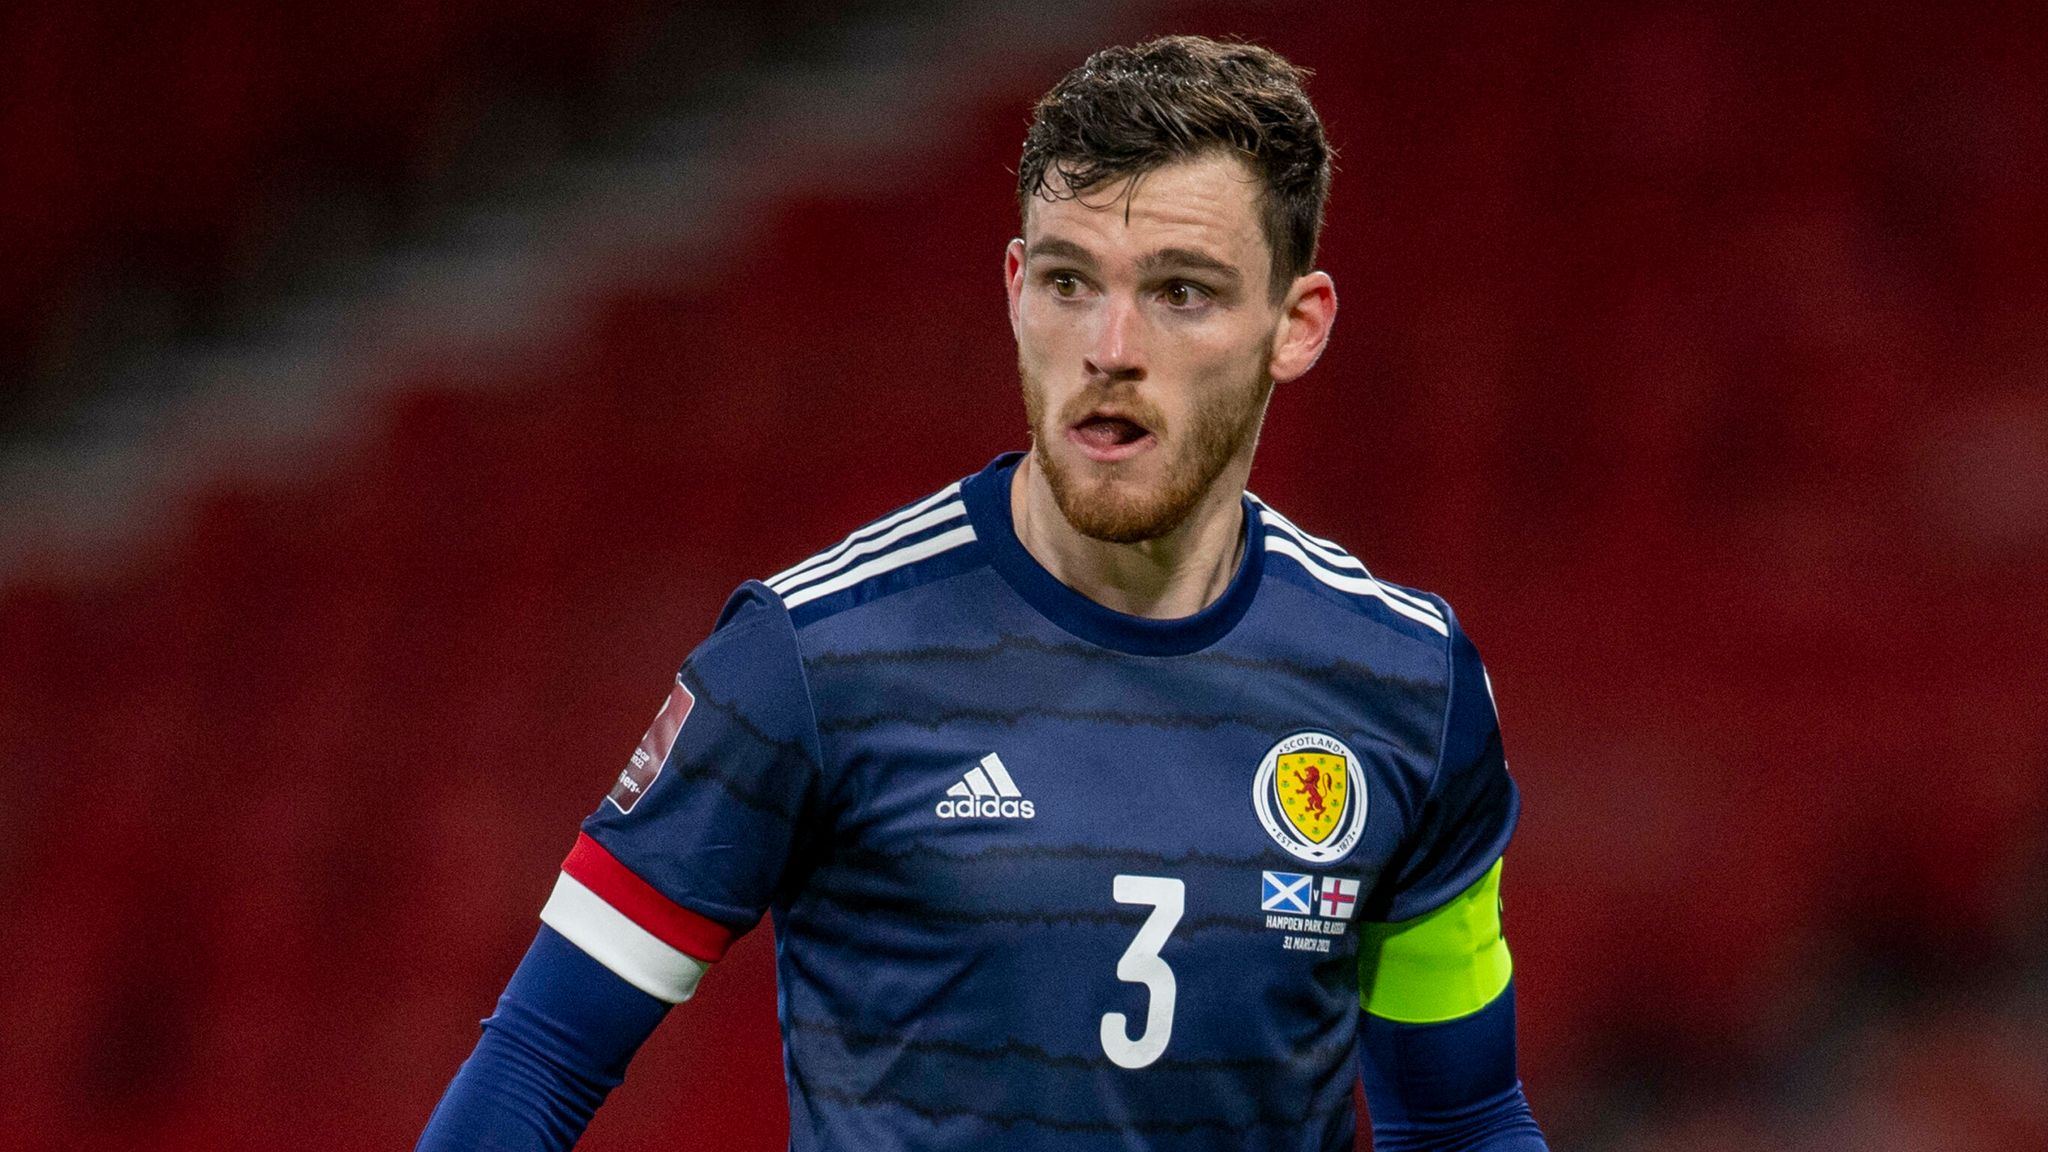 Andy Robertson: Steve Clarke has made Scotland squad selection more consistent